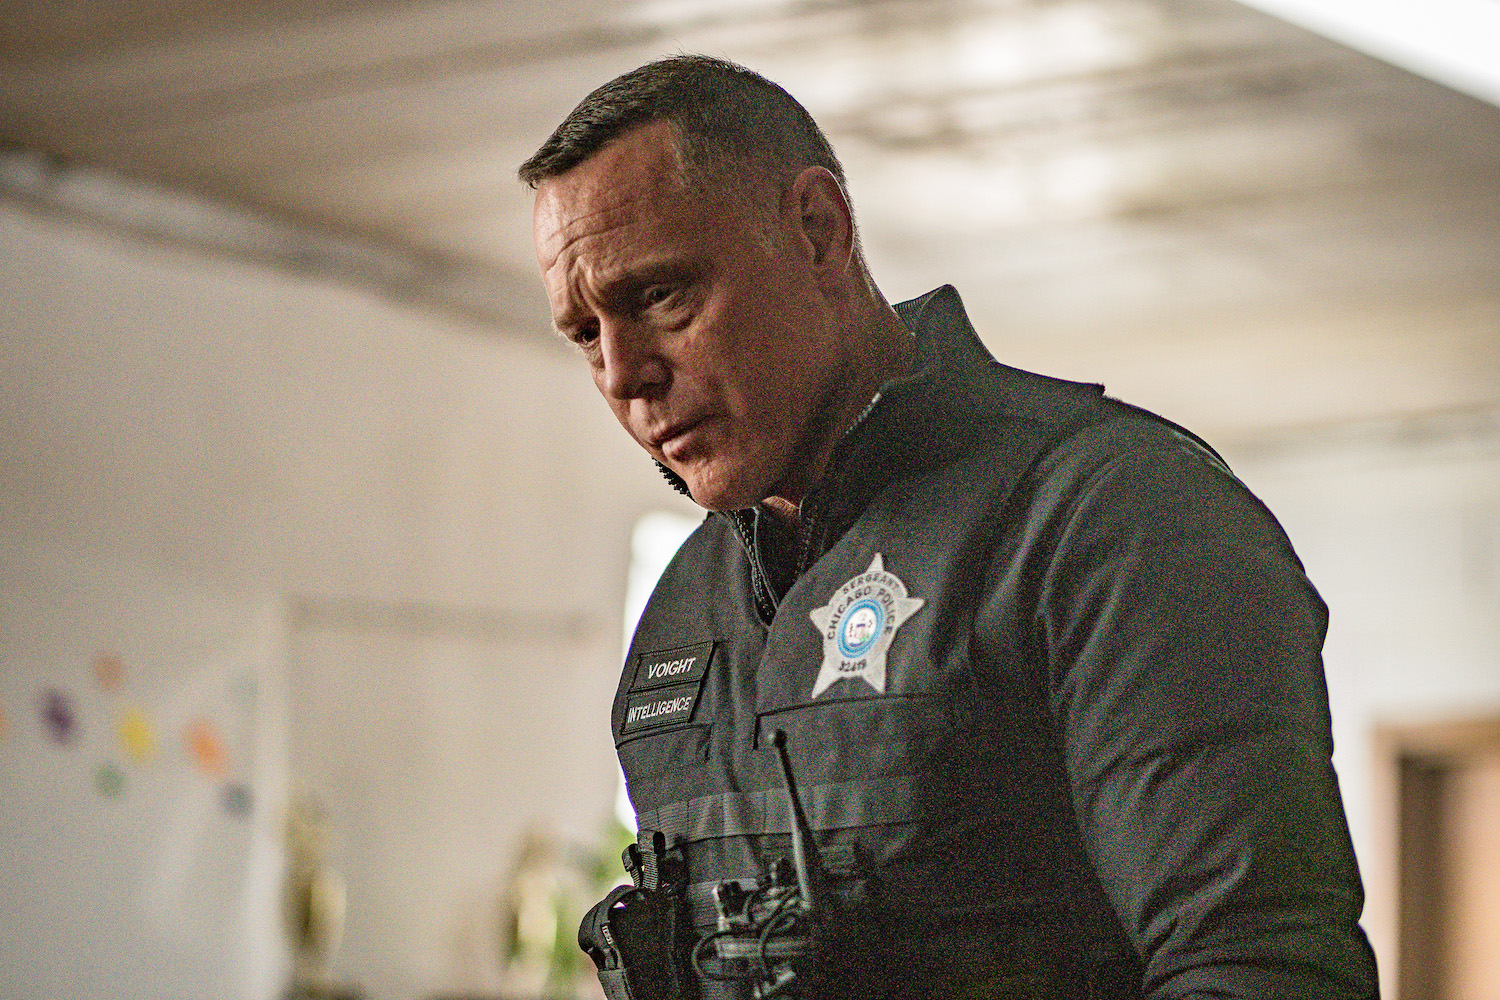 Jason Beghe in Chicago PD